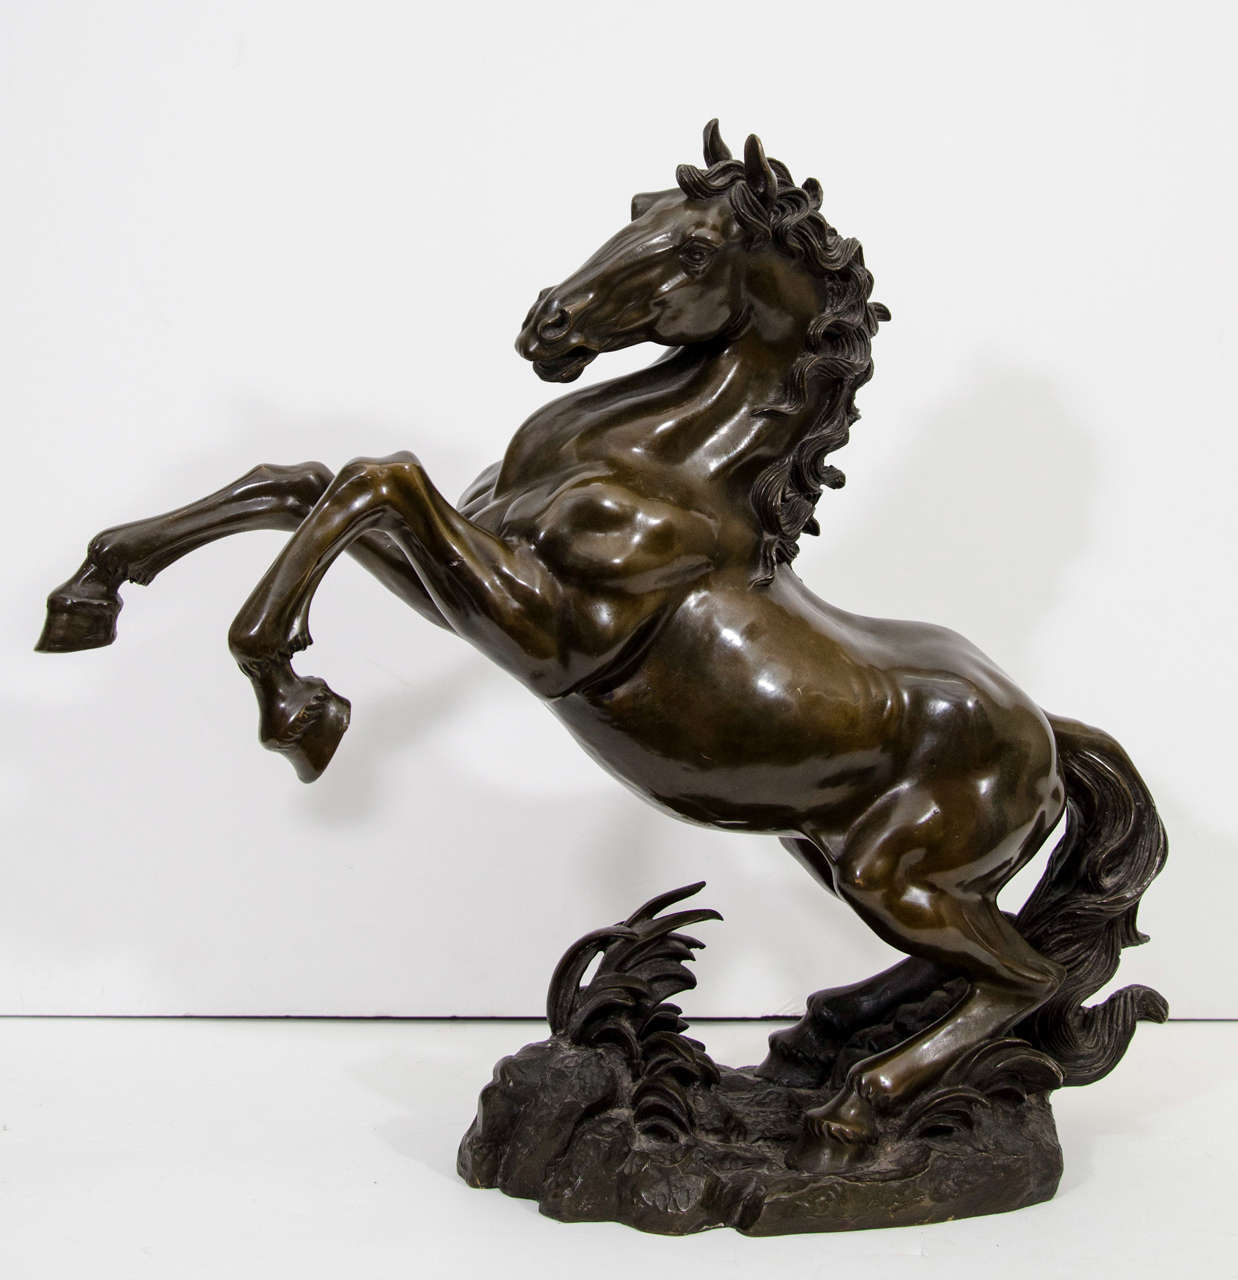 An antique Japanese bronze sculpture of a horse. The piece dates from the Meiji Period.